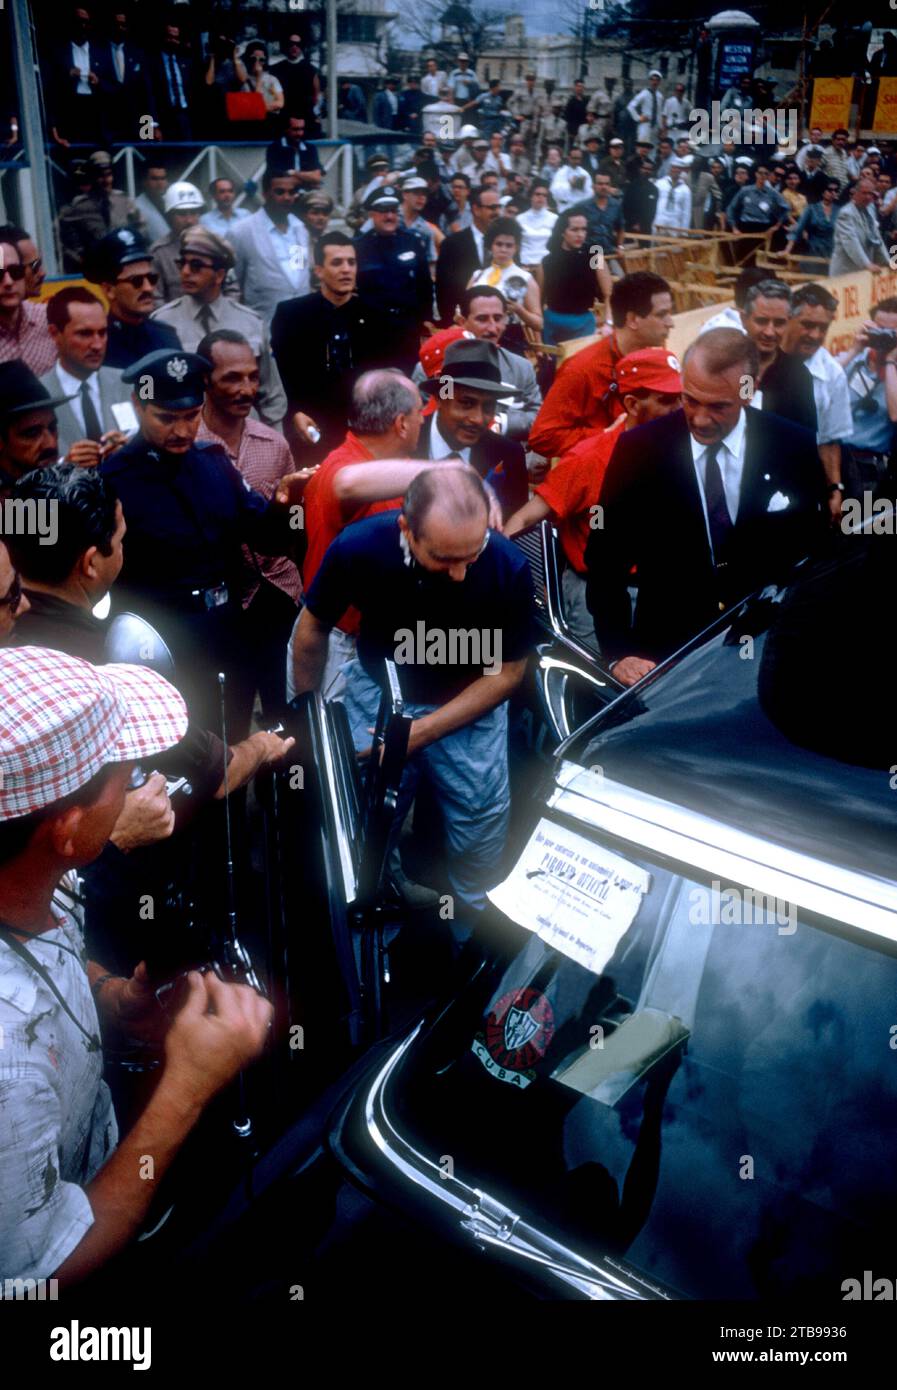 HAVANA, CUBA - FEBRUARY 24:  Juan Manuel Fangio (1911-1995) driver of the Maserati 300S and actor Gary Cooper (1901-1961) get into a car after the 1957 Cuban Grand Prix on February 24, 1957 in Havana, Cuba.  Fangio won the race.  (Photo by Hy Peskin) *** Local Caption *** Juan Manuel Fangio;Gary Cooper Stock Photo